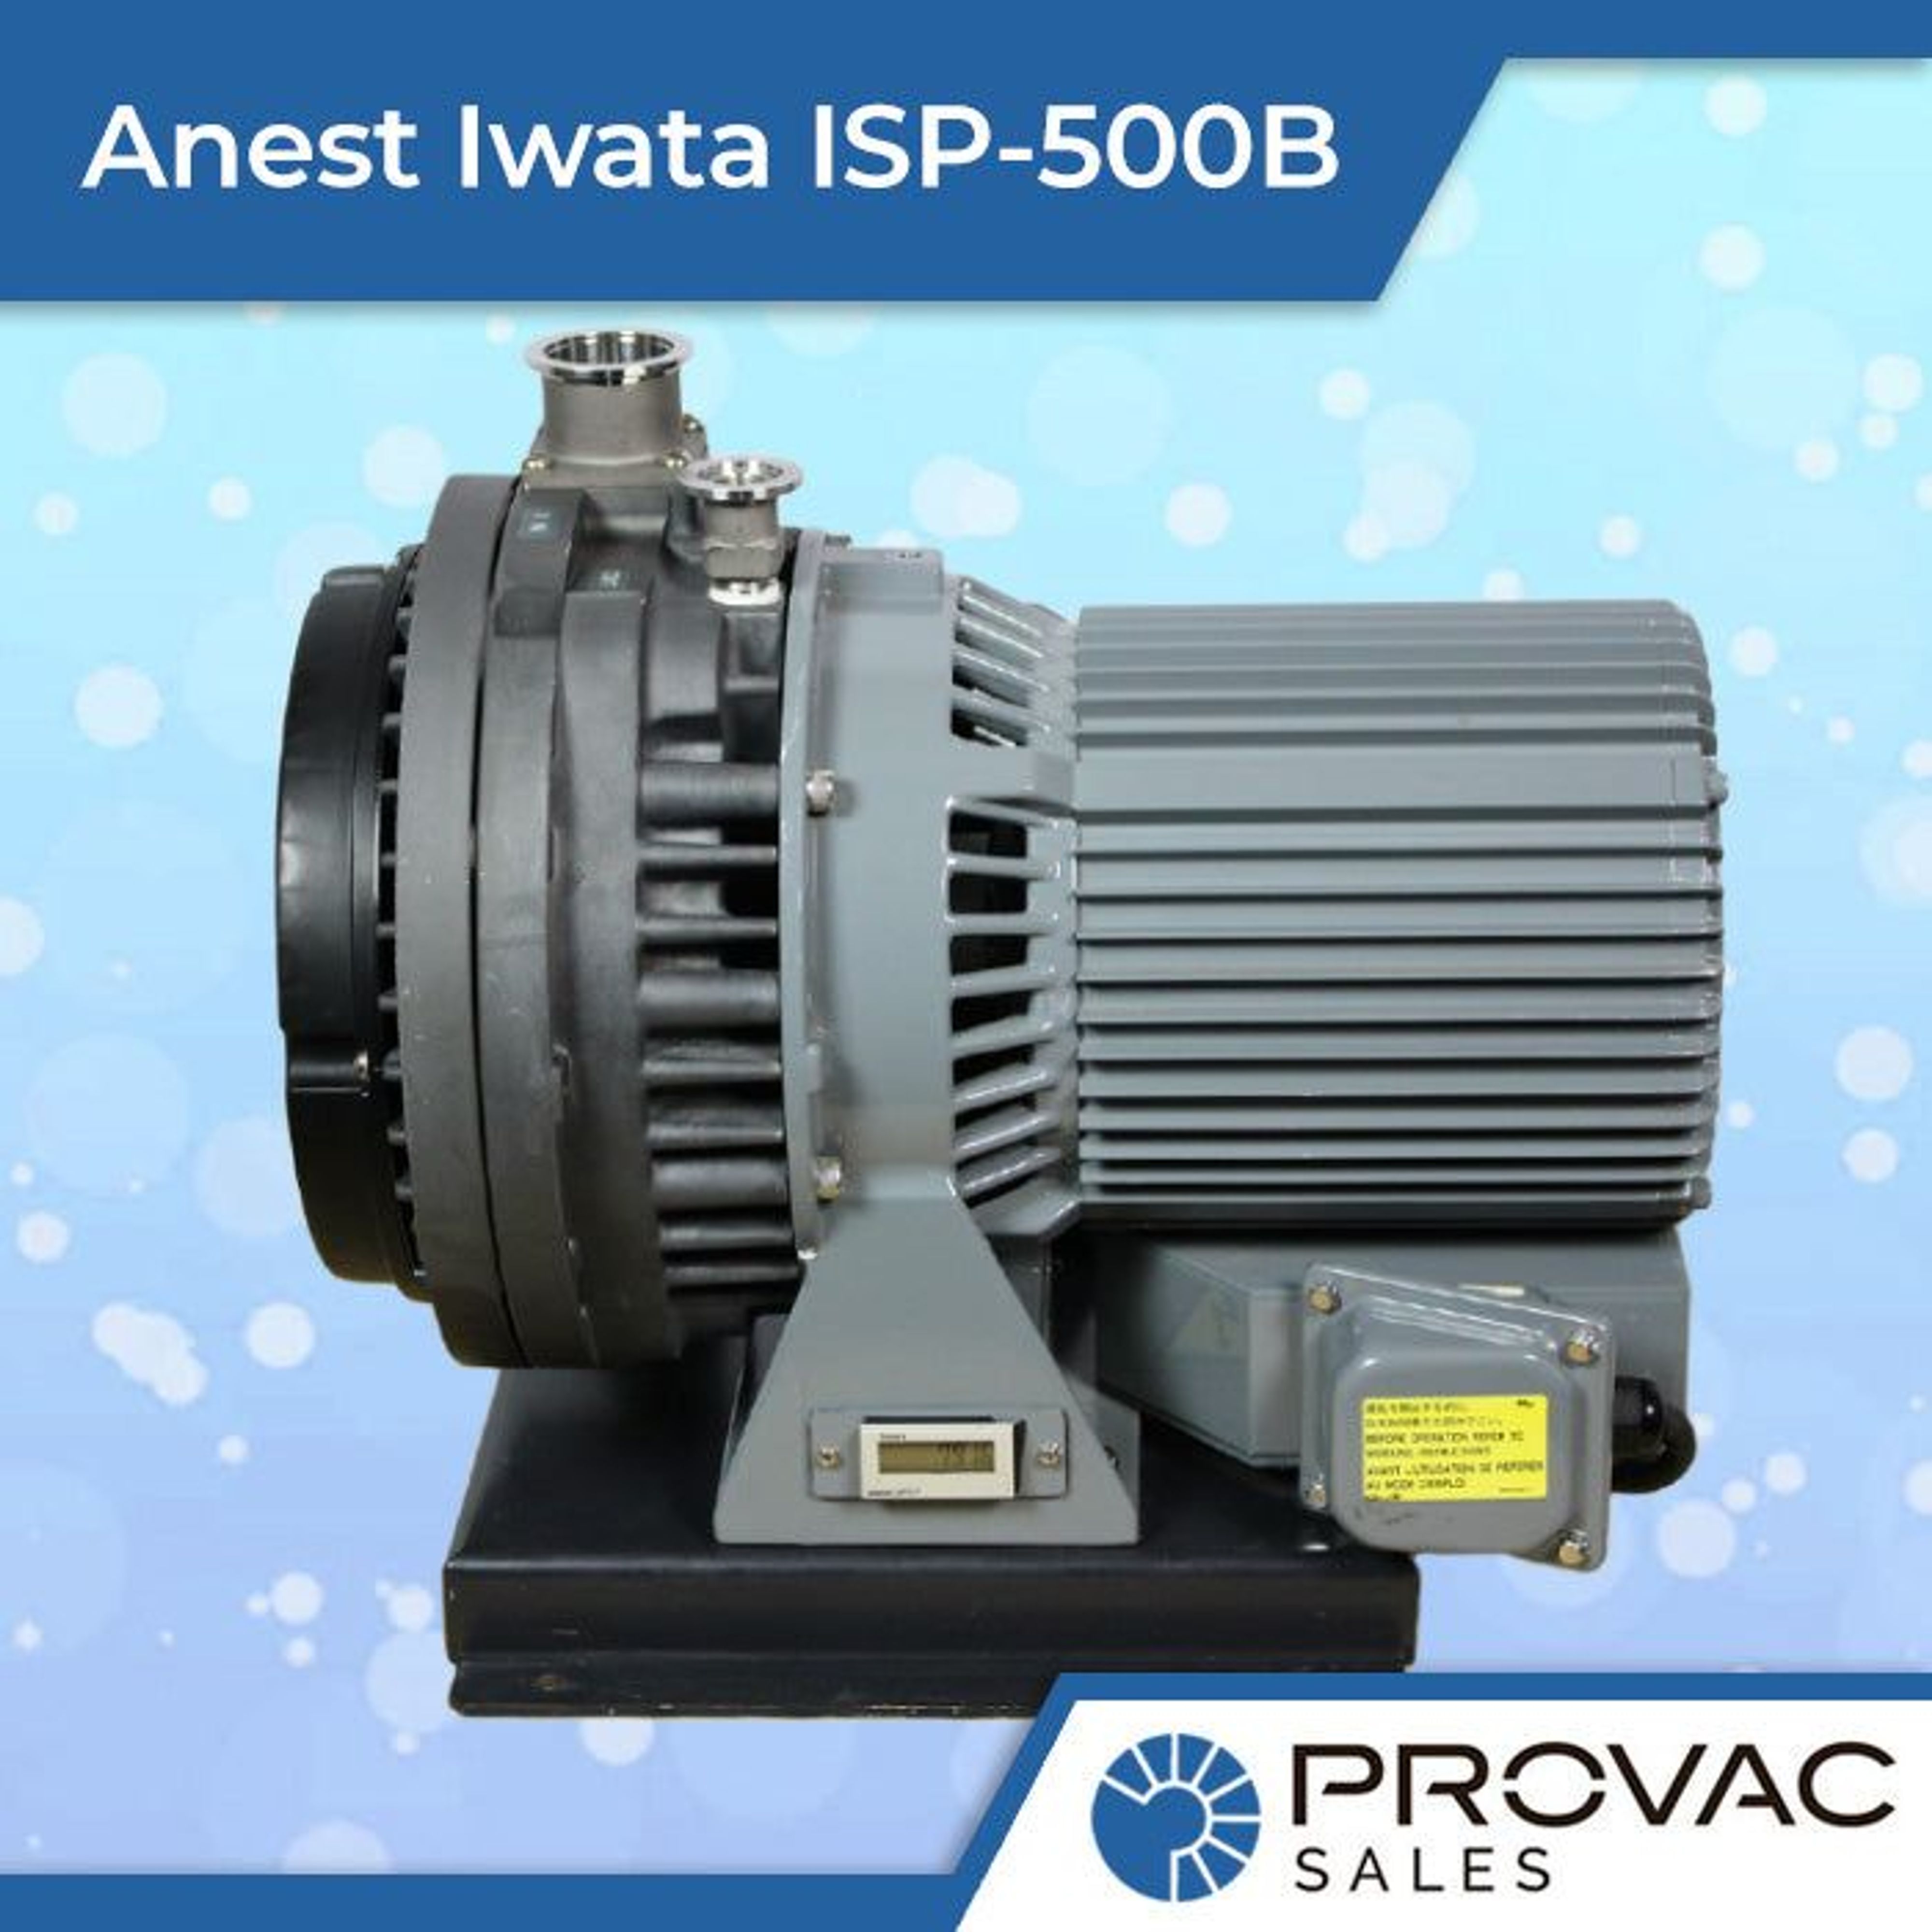 Anest Iwata ISP-500B Scroll Pump: In Stock, Ready To Ship Background